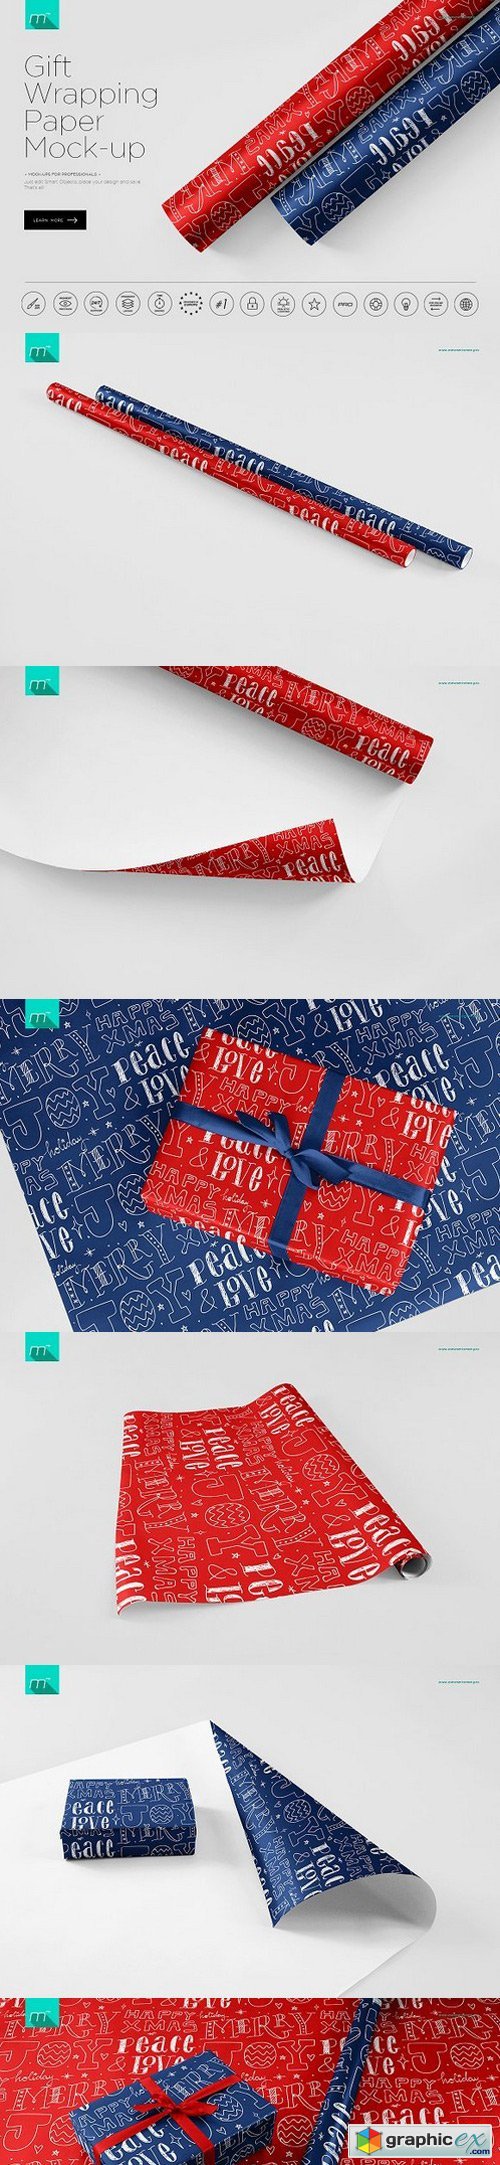 Gift Wrapping Paper Mock-up